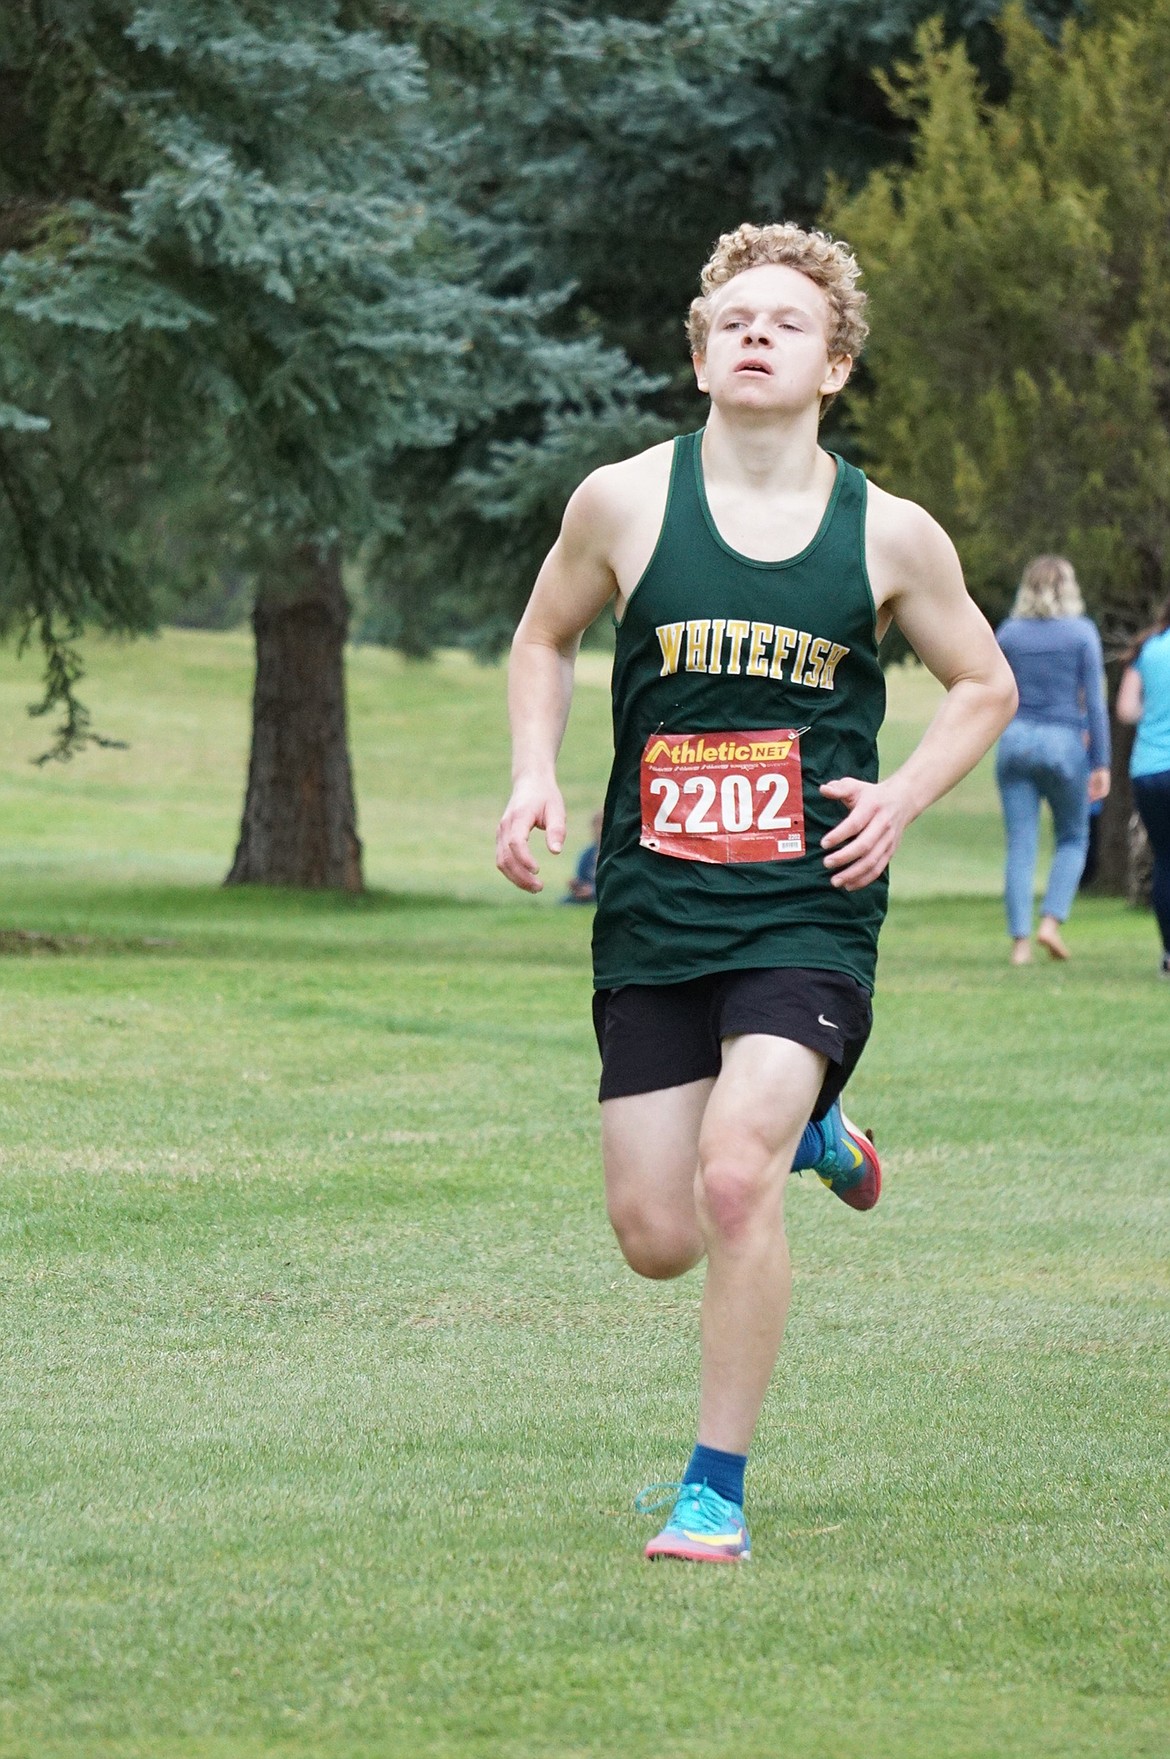 Whitefish junior Jack McDaniel finished in the top three for junior varsity Friday at the cross country meet in Libby. (Matt Weller photo)